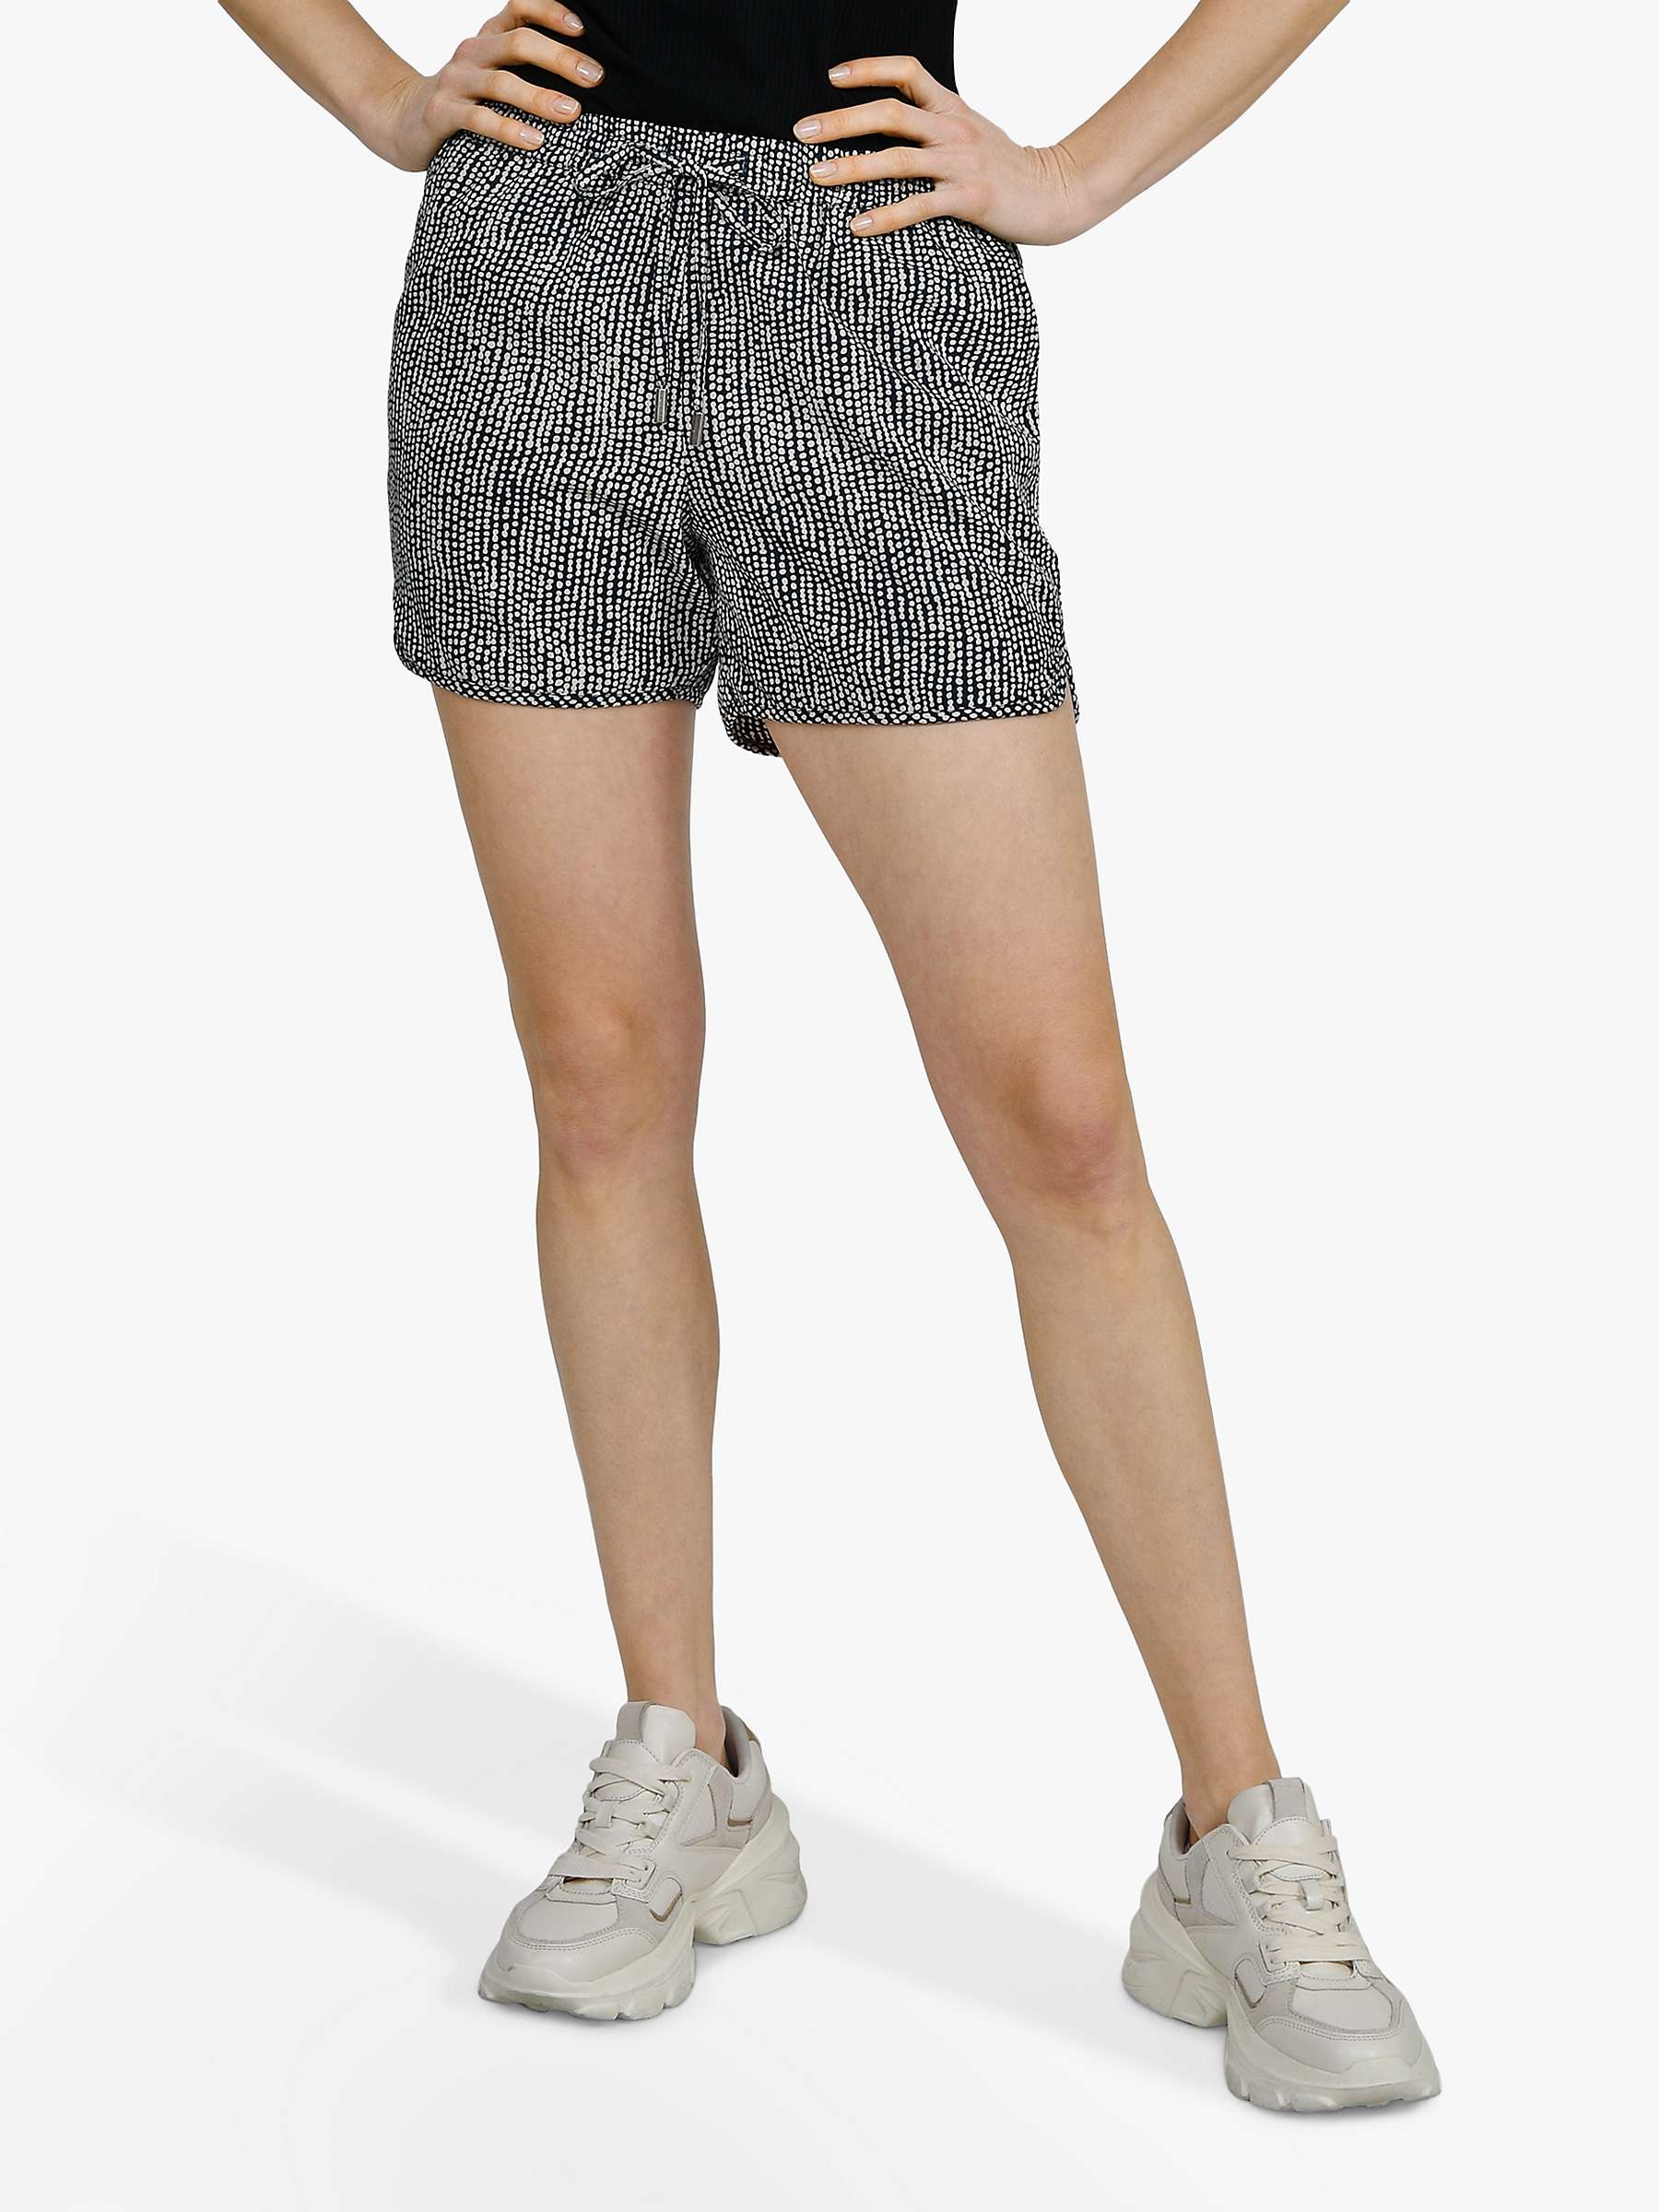 Buy Sisters Point Ella Dot Print Loose Fitted Shorts, Navy/White Online at johnlewis.com